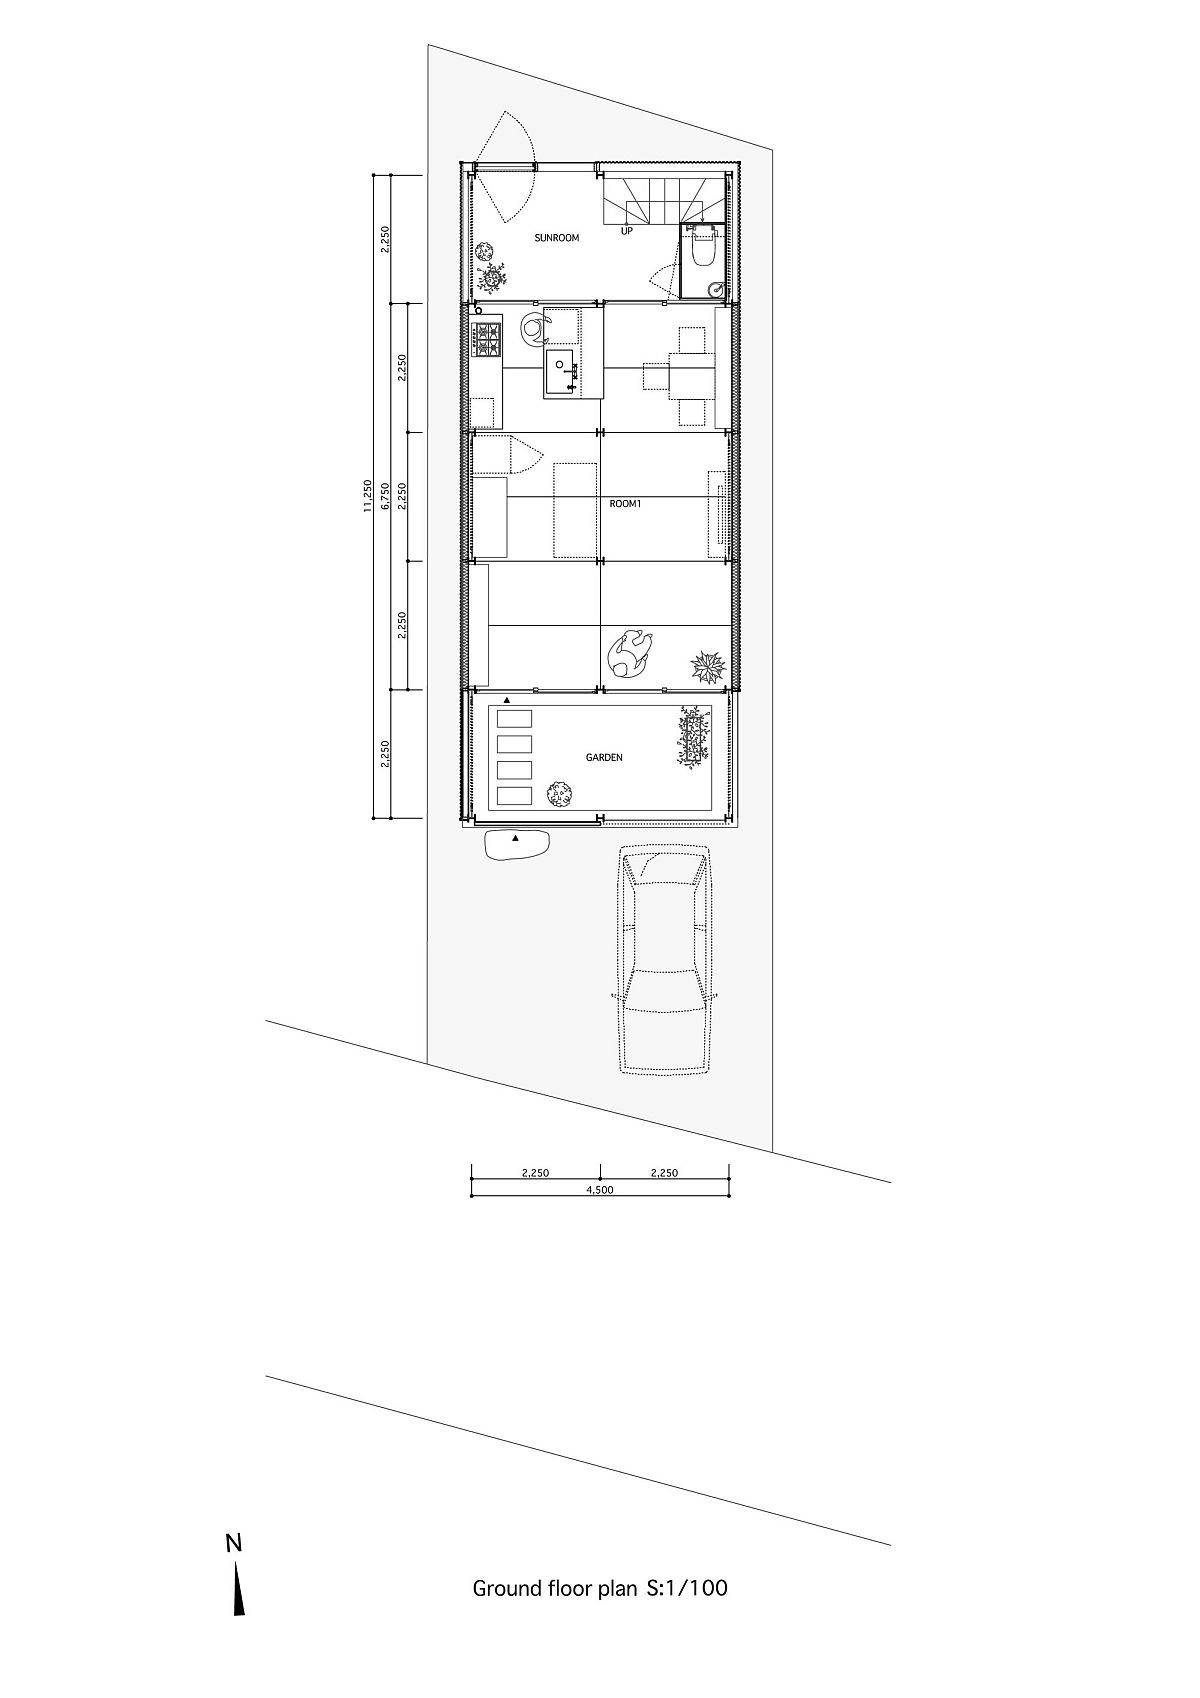 Ground-floor-plan-of-the-adaptabl-and-flexible-house-in-Japan-with-smart-frame-26897